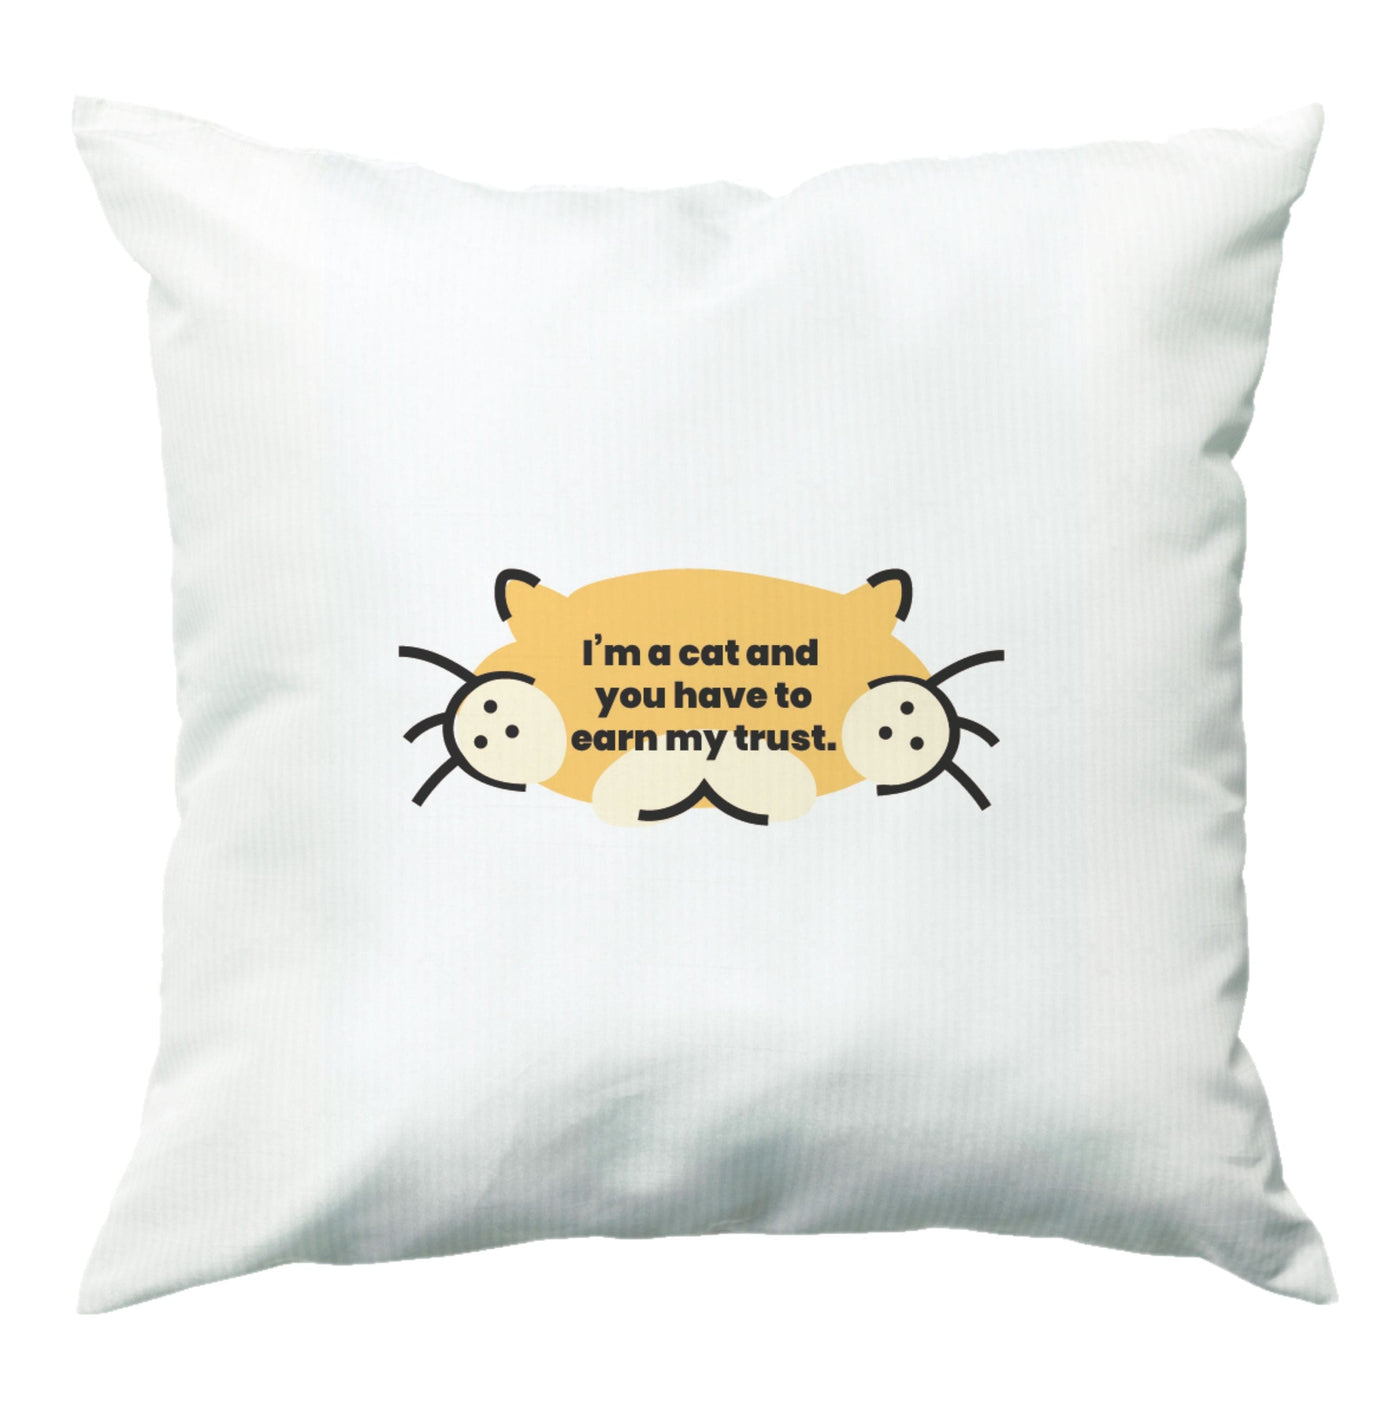 I'm a cat and you have to earn my trust - Kendall Jenner Cushion